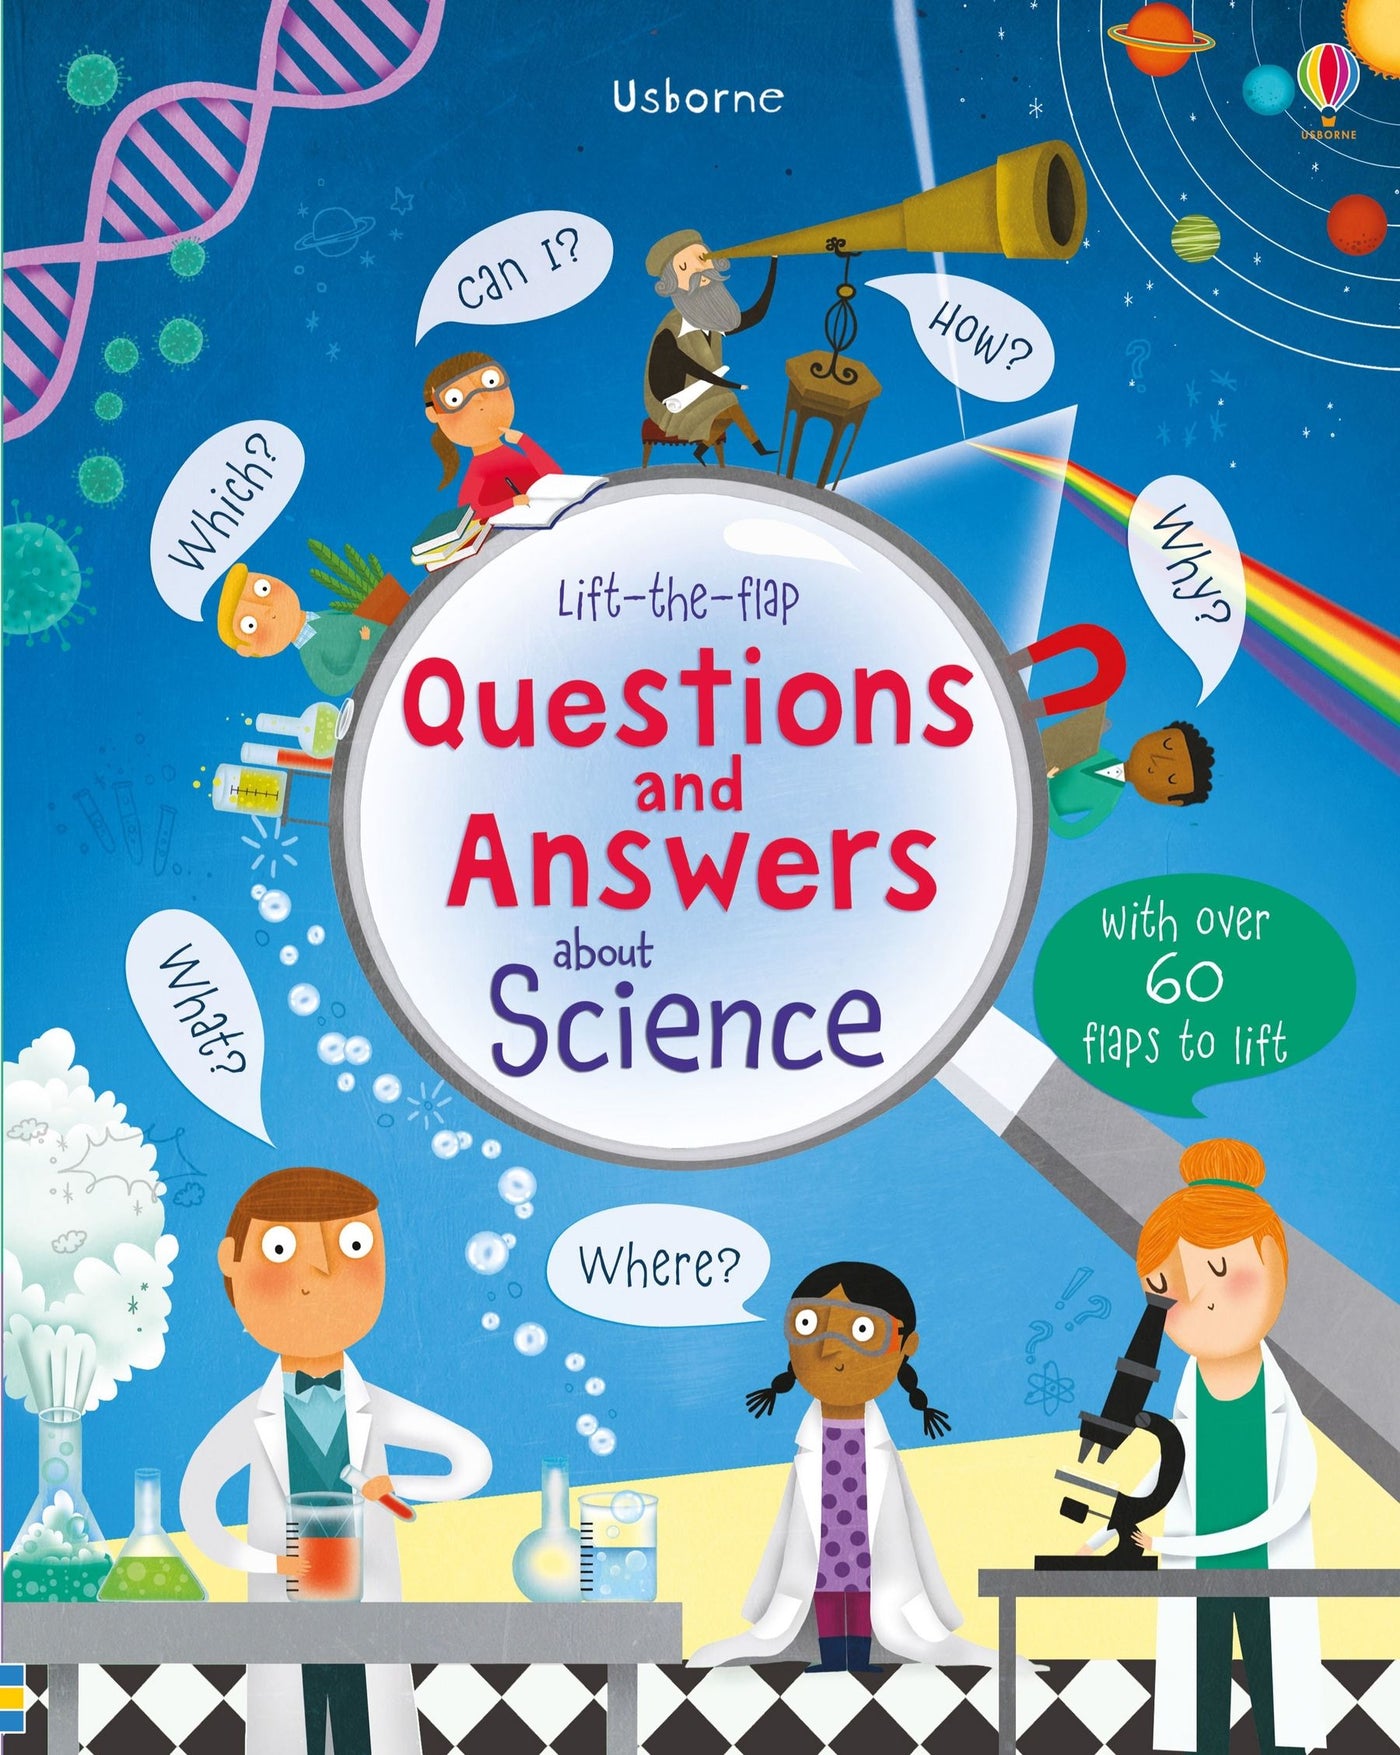 Lift-the-flap Questions and Answers about Science | Usborne Books